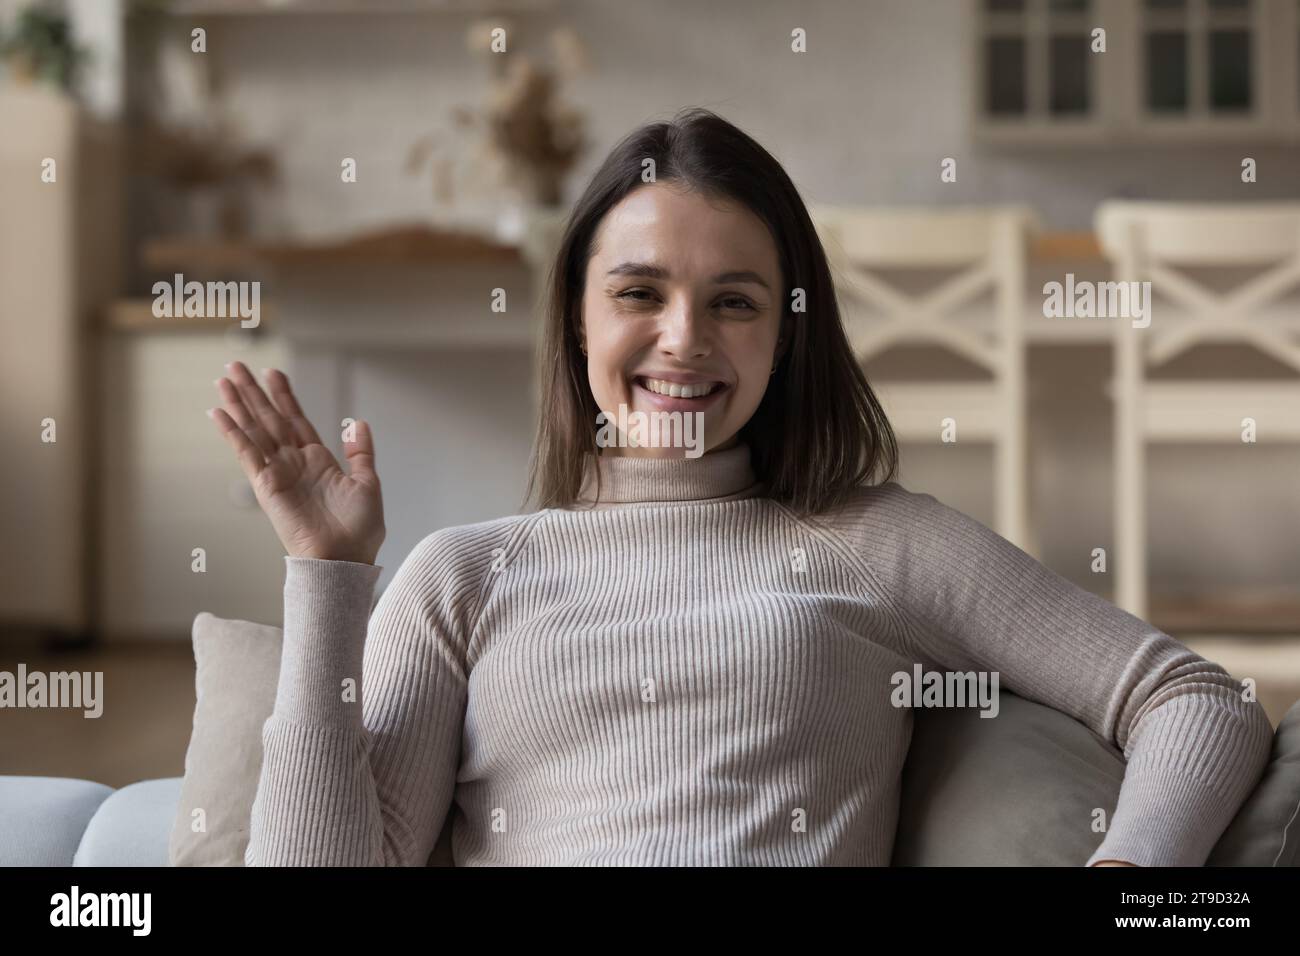 Profile picture of woman make video call at home Stock Photo